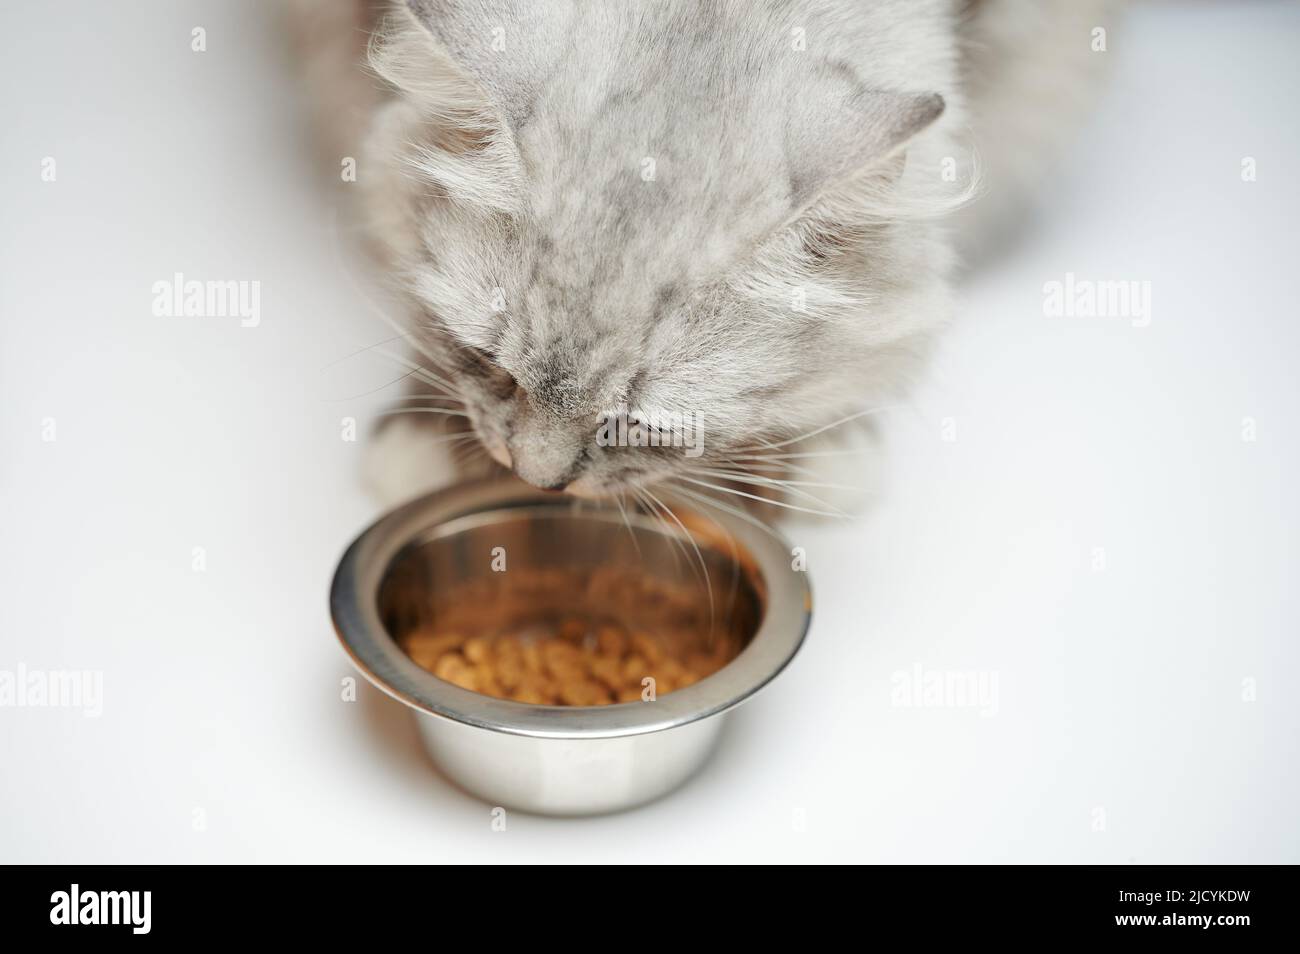 Taking care of pet theme. Grey cat eat dry food from metal plate Stock Photo